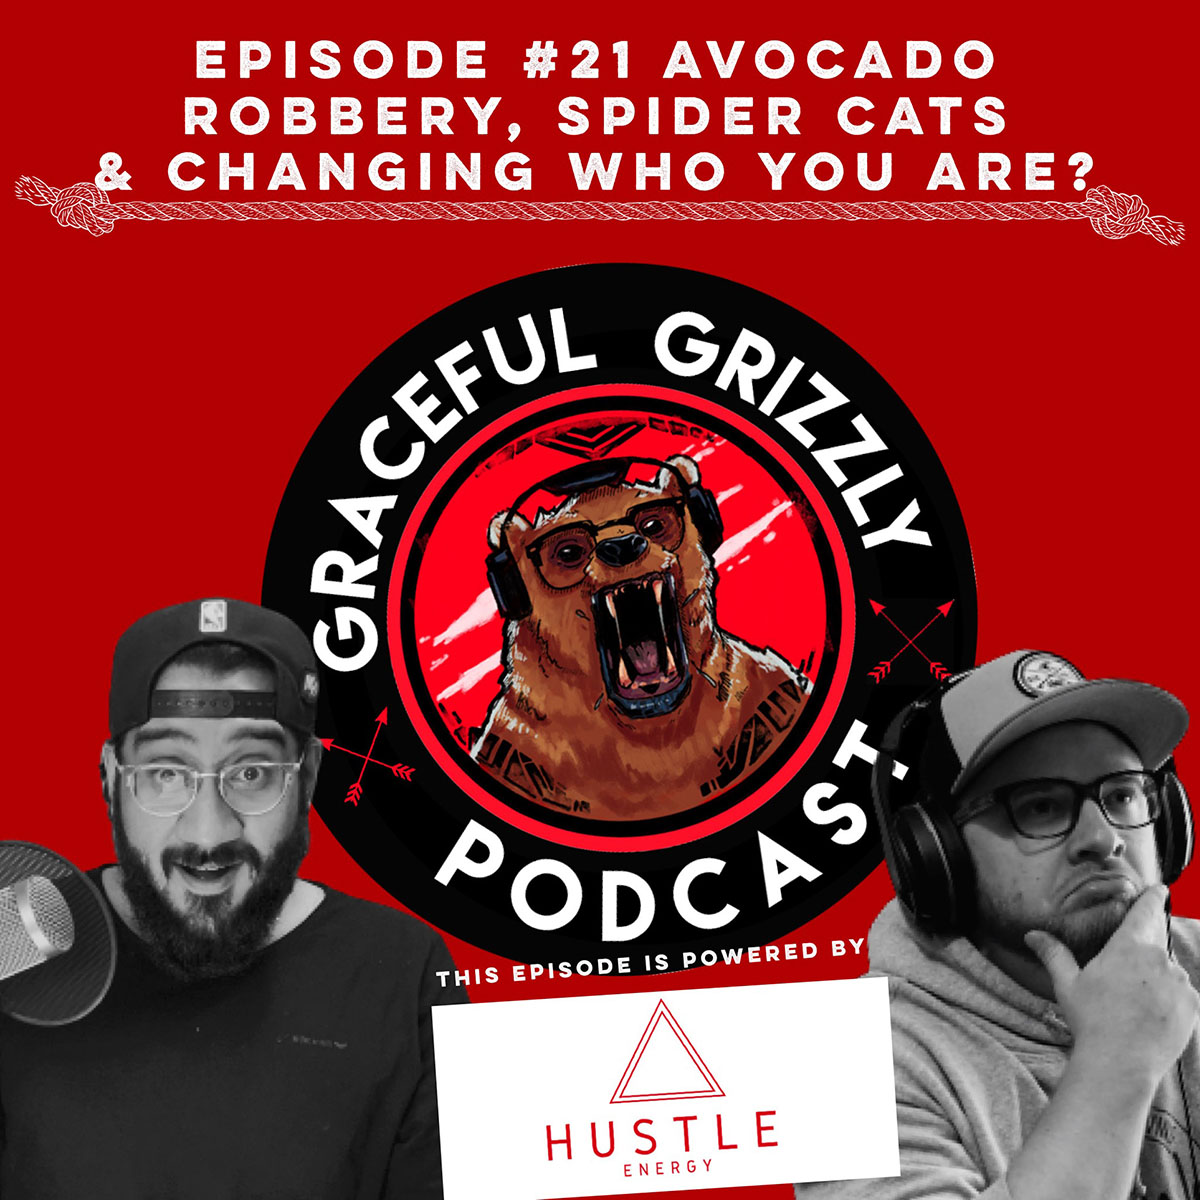 Episode 21 - Graceful Grizzly Podcast